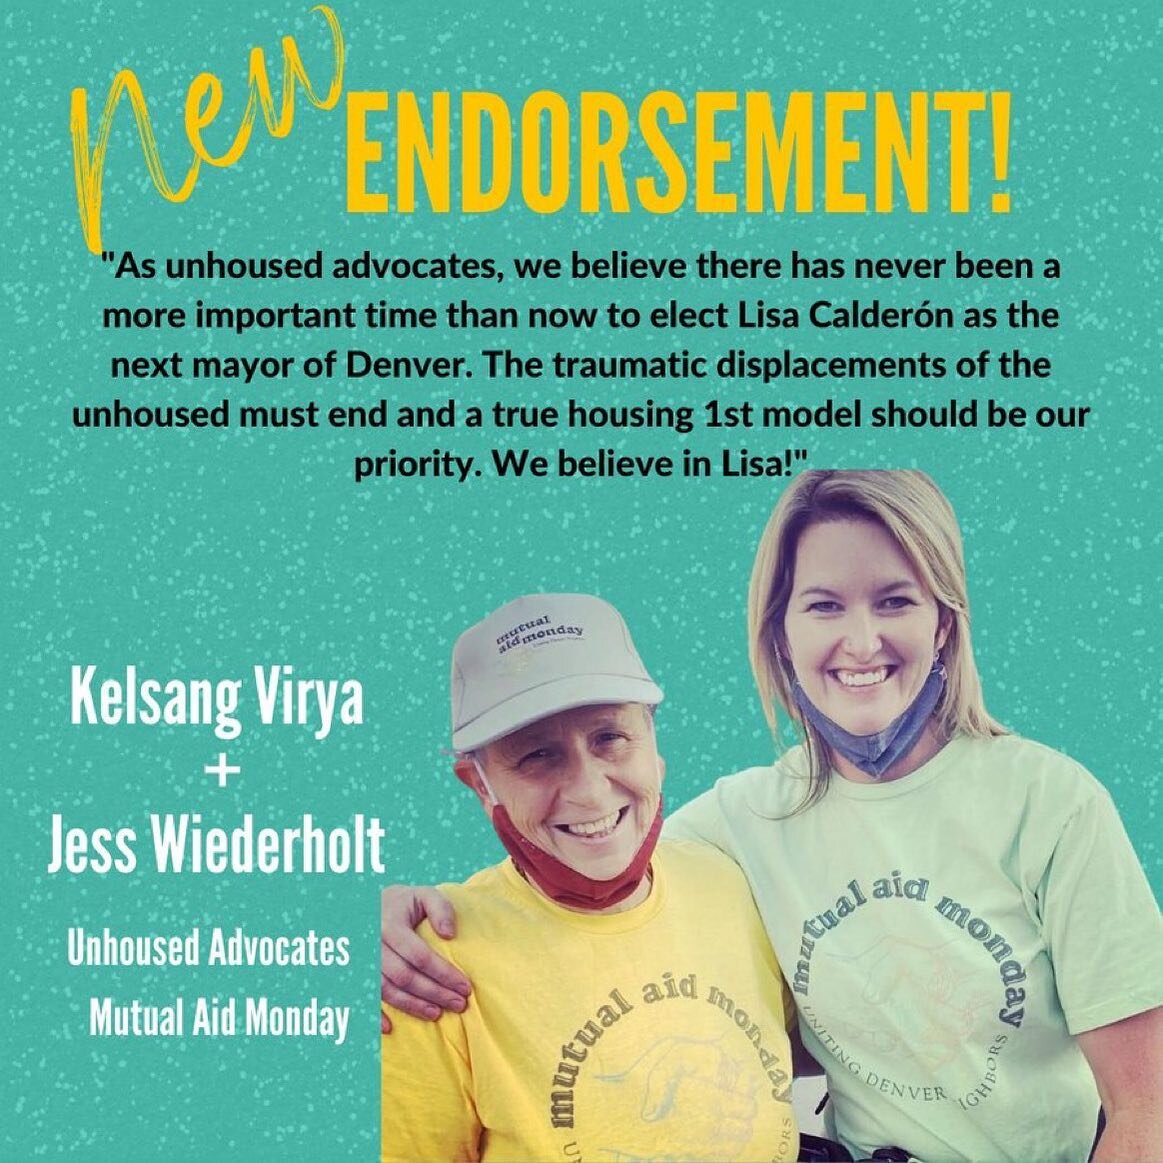 So proud to have the endorsement of two of my good friends! The work of @mutualaidmonday is so critical and I look forward to working with advocates like Kelsang and Jess as mayor as we pivot from a shelter-first approach to a housing-first approach 